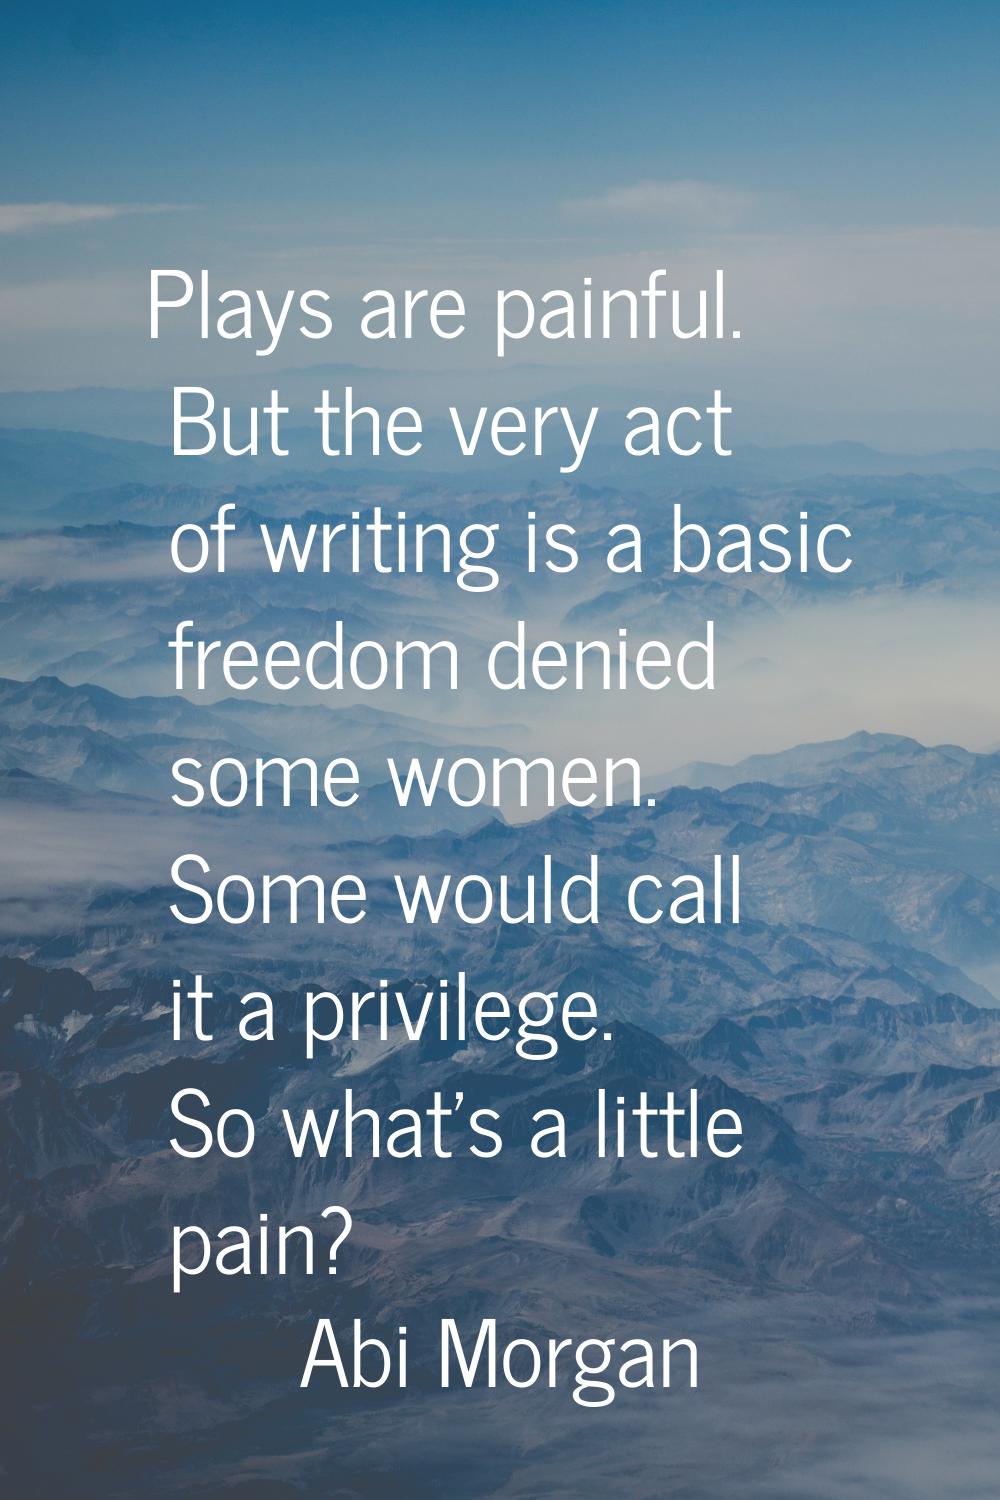 Plays are painful. But the very act of writing is a basic freedom denied some women. Some would cal